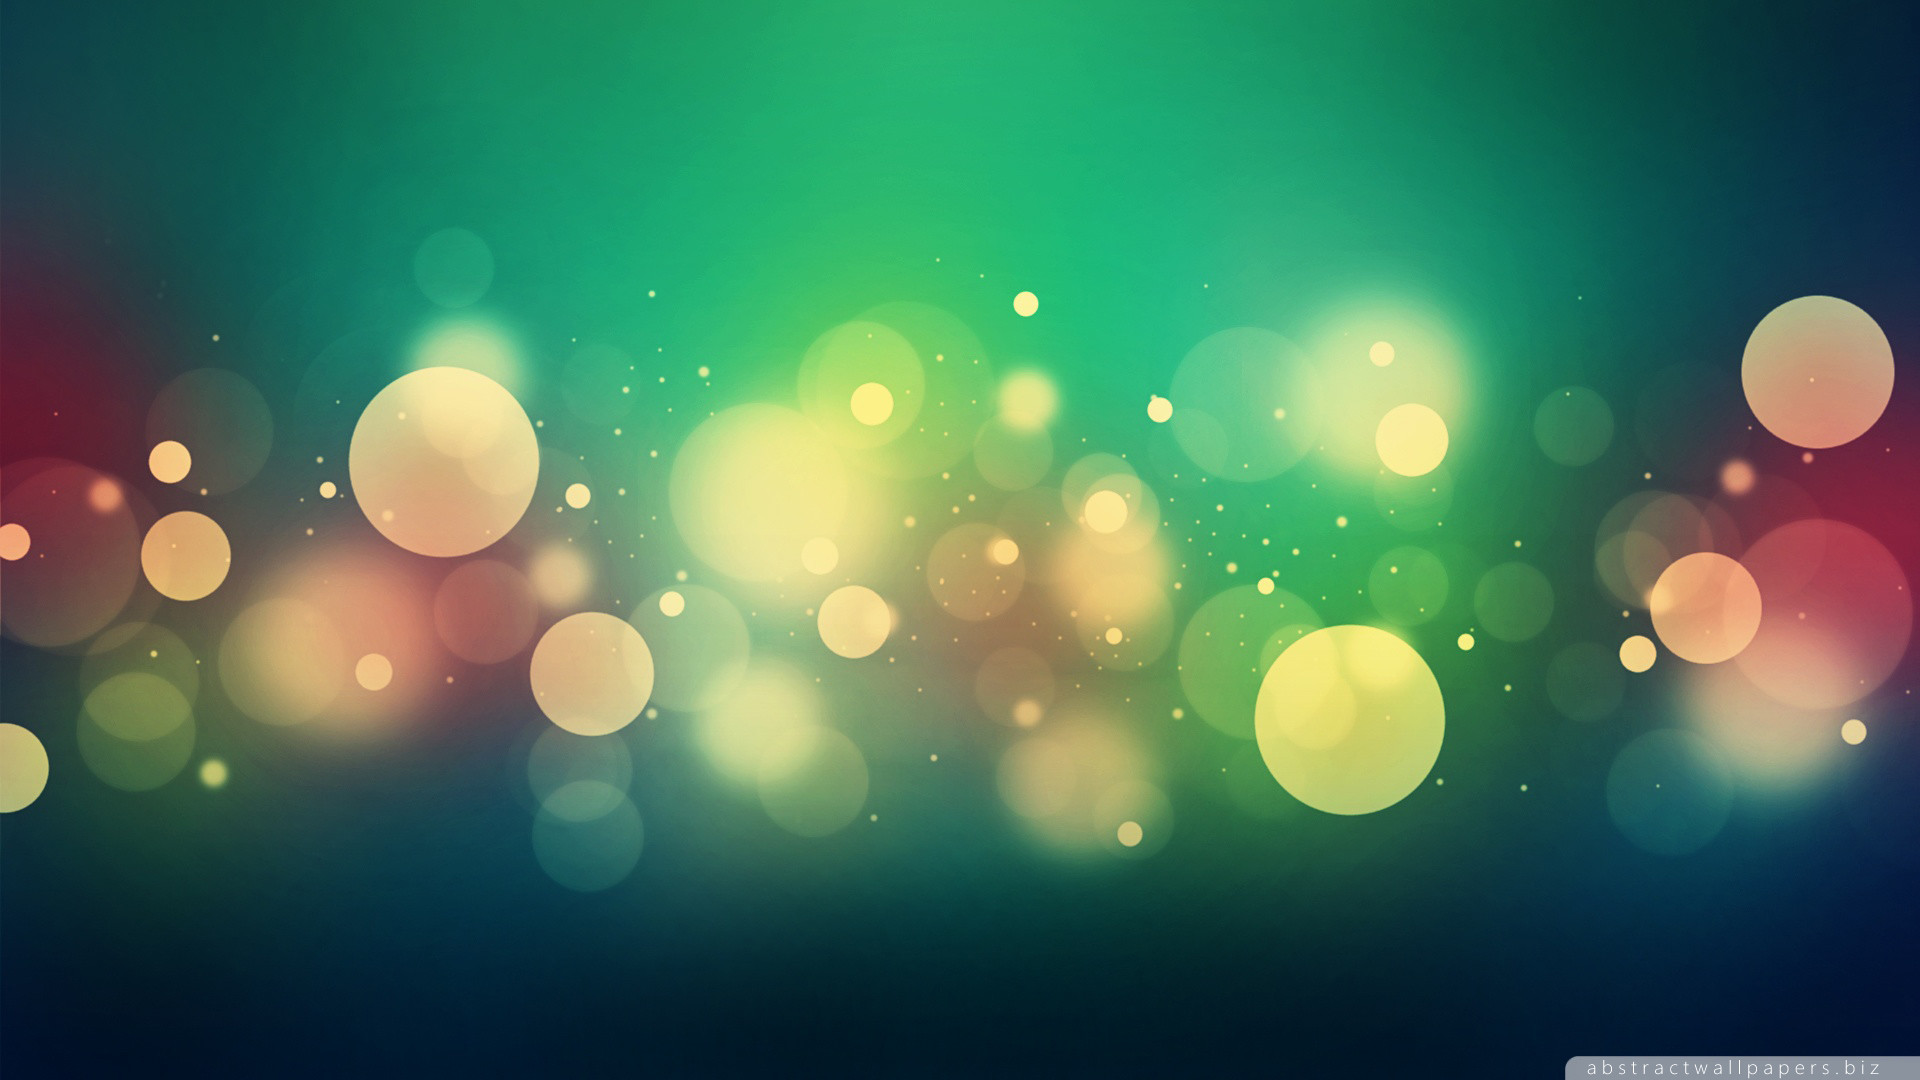 Abstract Colorful Bubbles Wallpaper